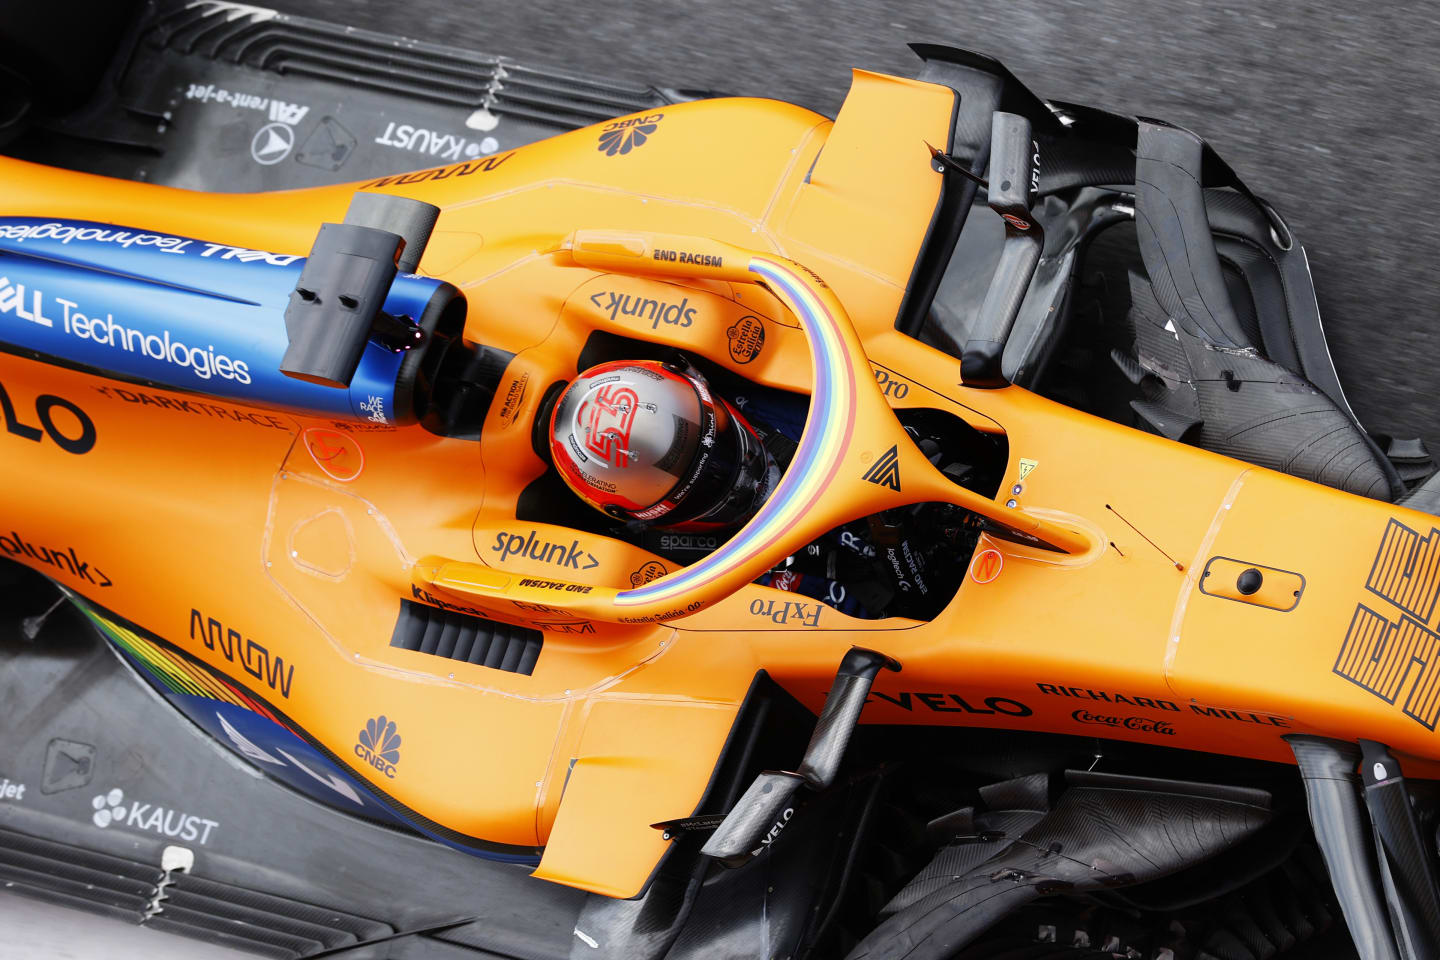 NORTHAMPTON, ENGLAND - AUGUST 08: Carlos Sainz of Spain driving the (55) McLaren F1 Team MCL35 Renault during qualifying for the F1 70th Anniversary Grand Prix at Silverstone on August 08, 2020 in Northampton, England. (Photo by Andrew Boyers/Pool via Getty Images)